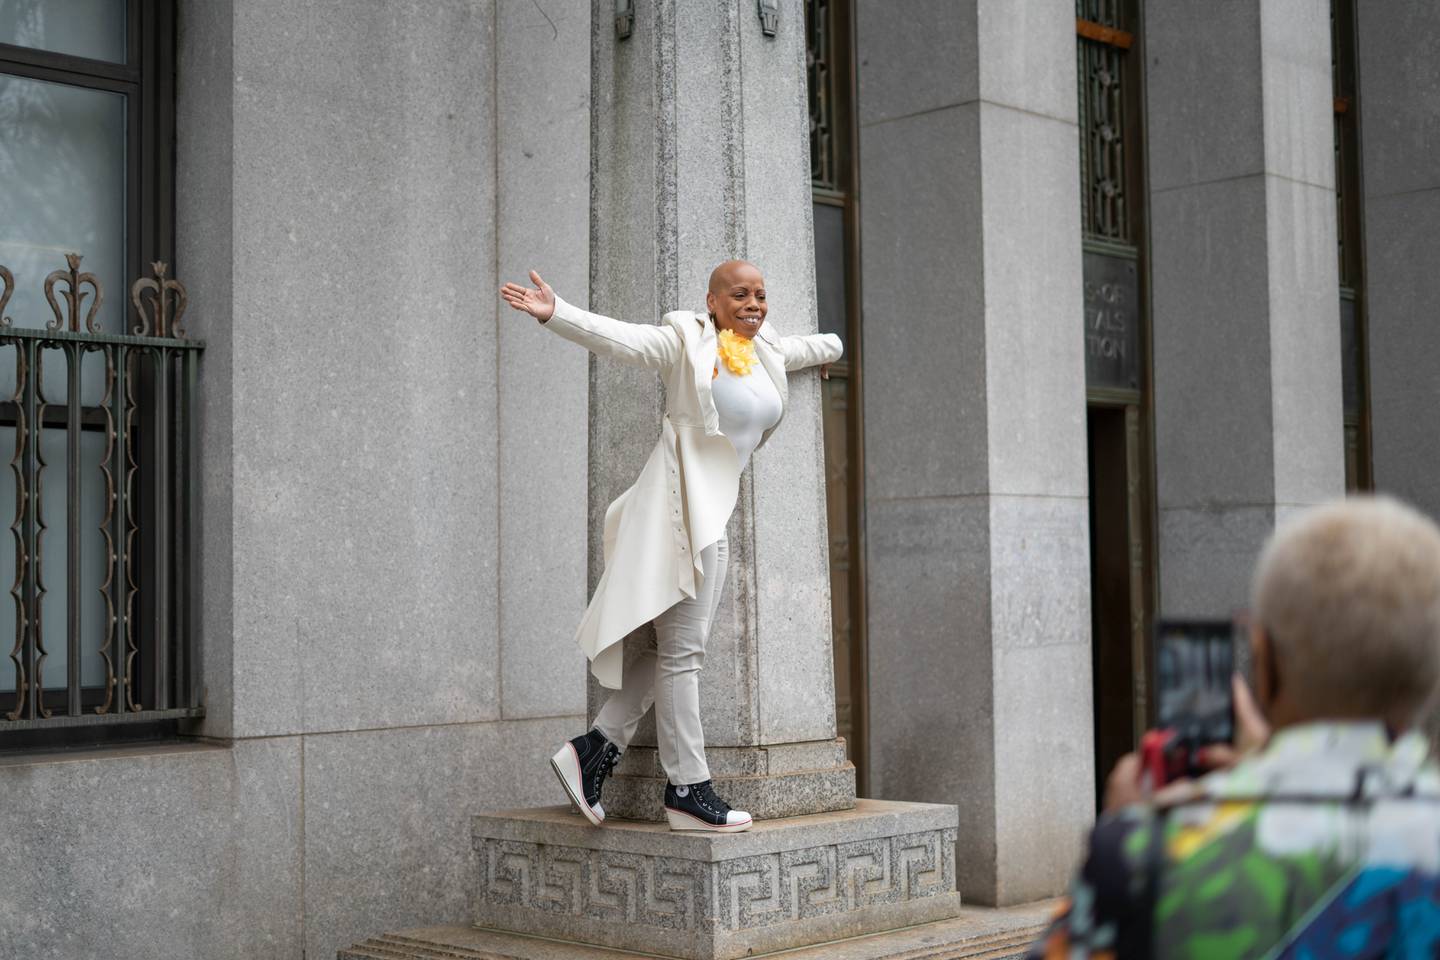 Monique Smith showing excitement after arriving to the Office of Vital Records in New York City, New York, April 26, 2022.